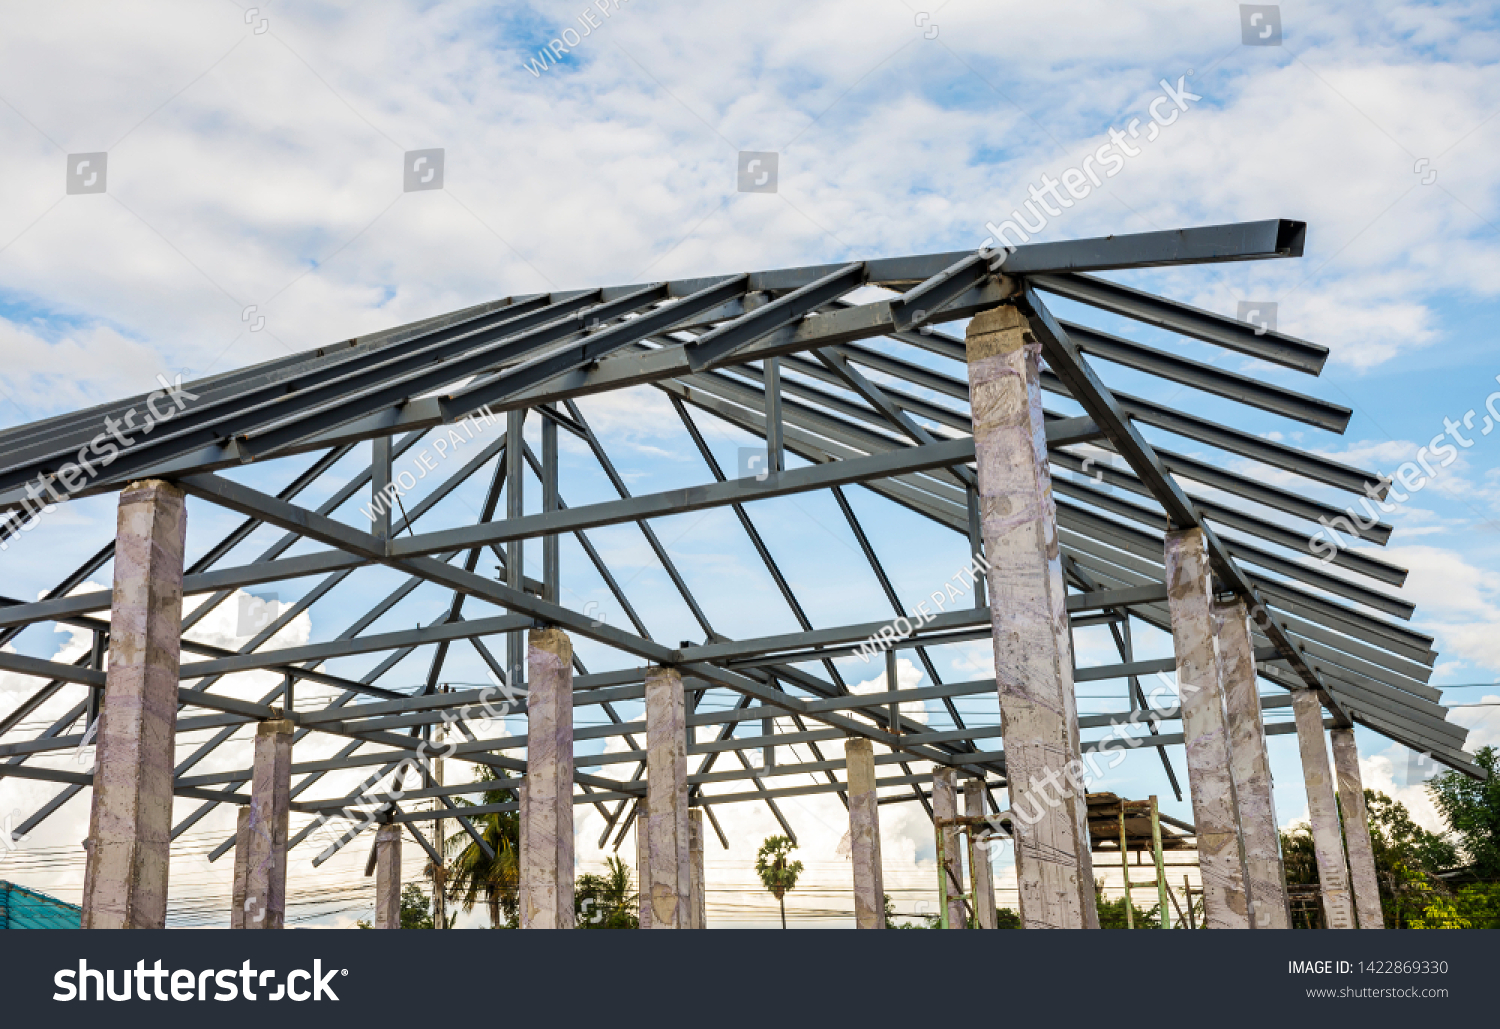 Structure of houses, pillars and concrete floors, roof structures using steel in construction #1422869330